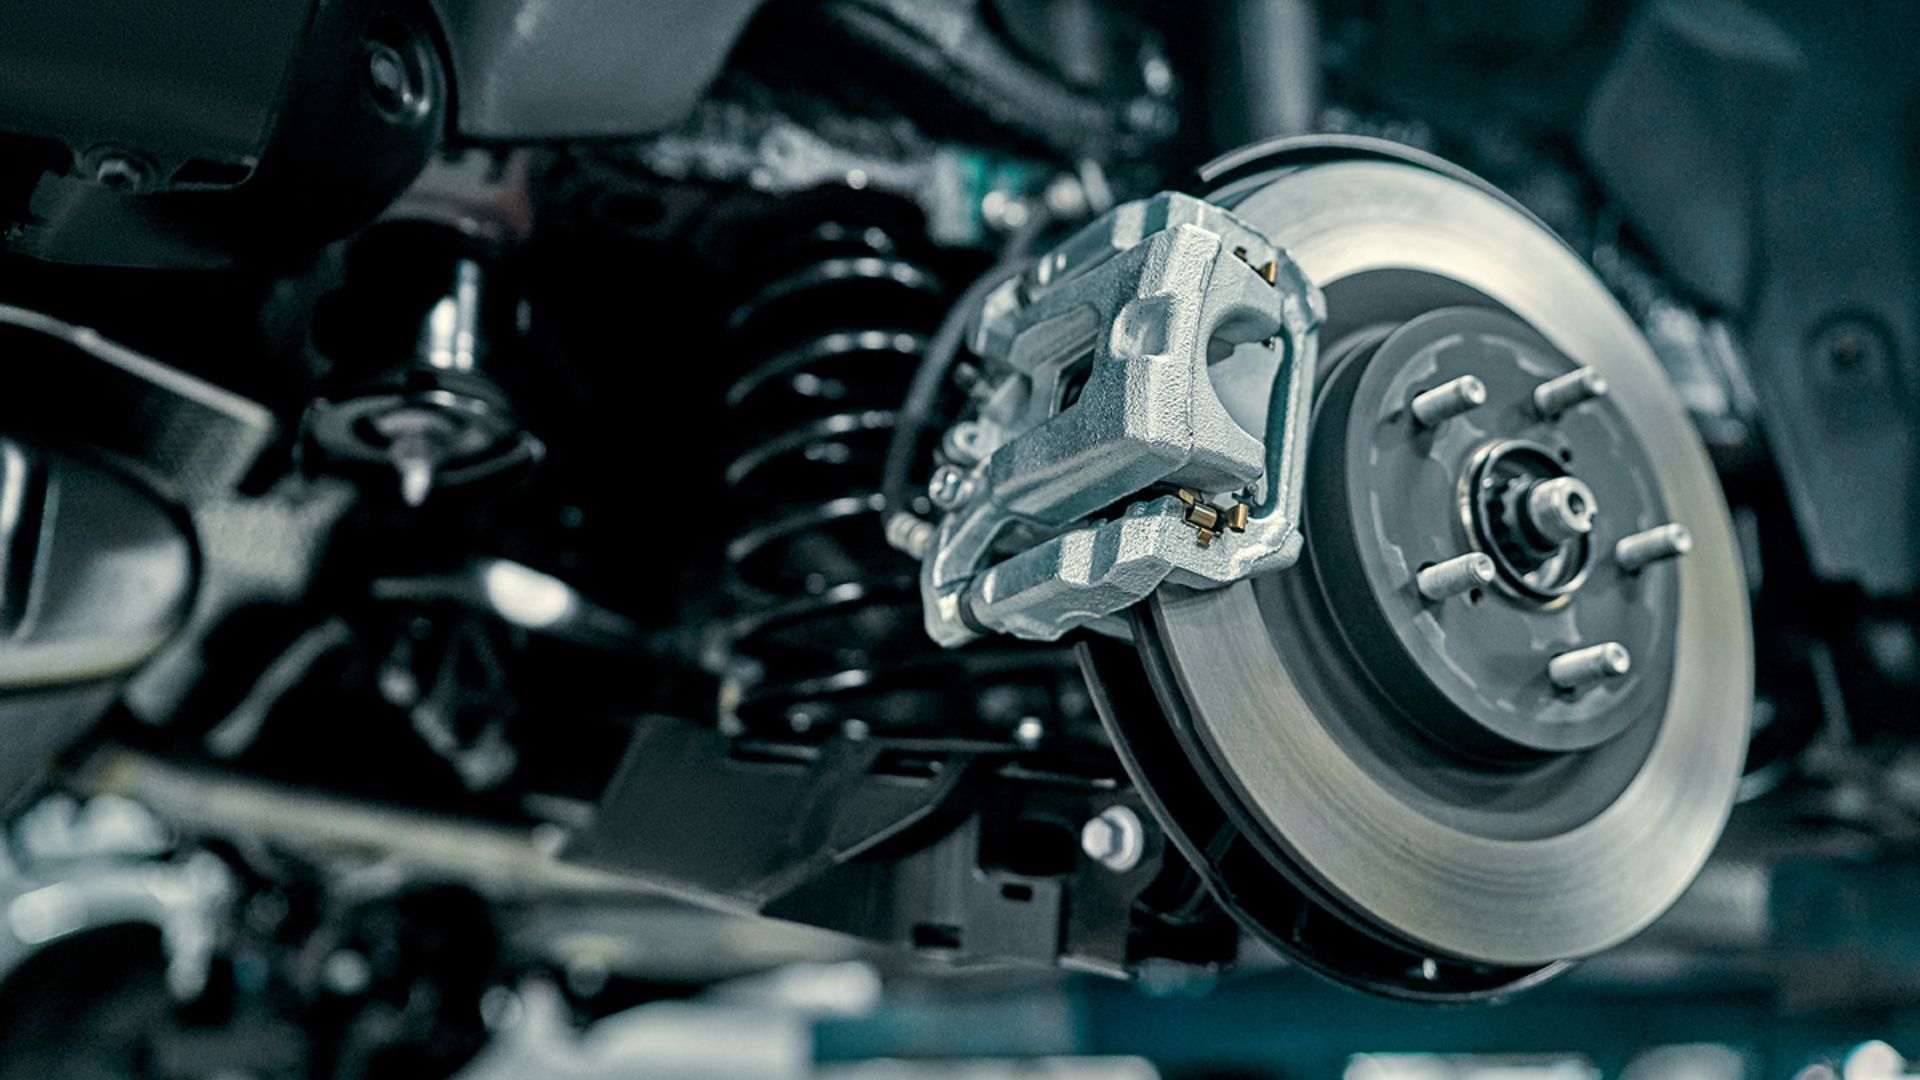 Importance Of Quality Brake Discs And Pads